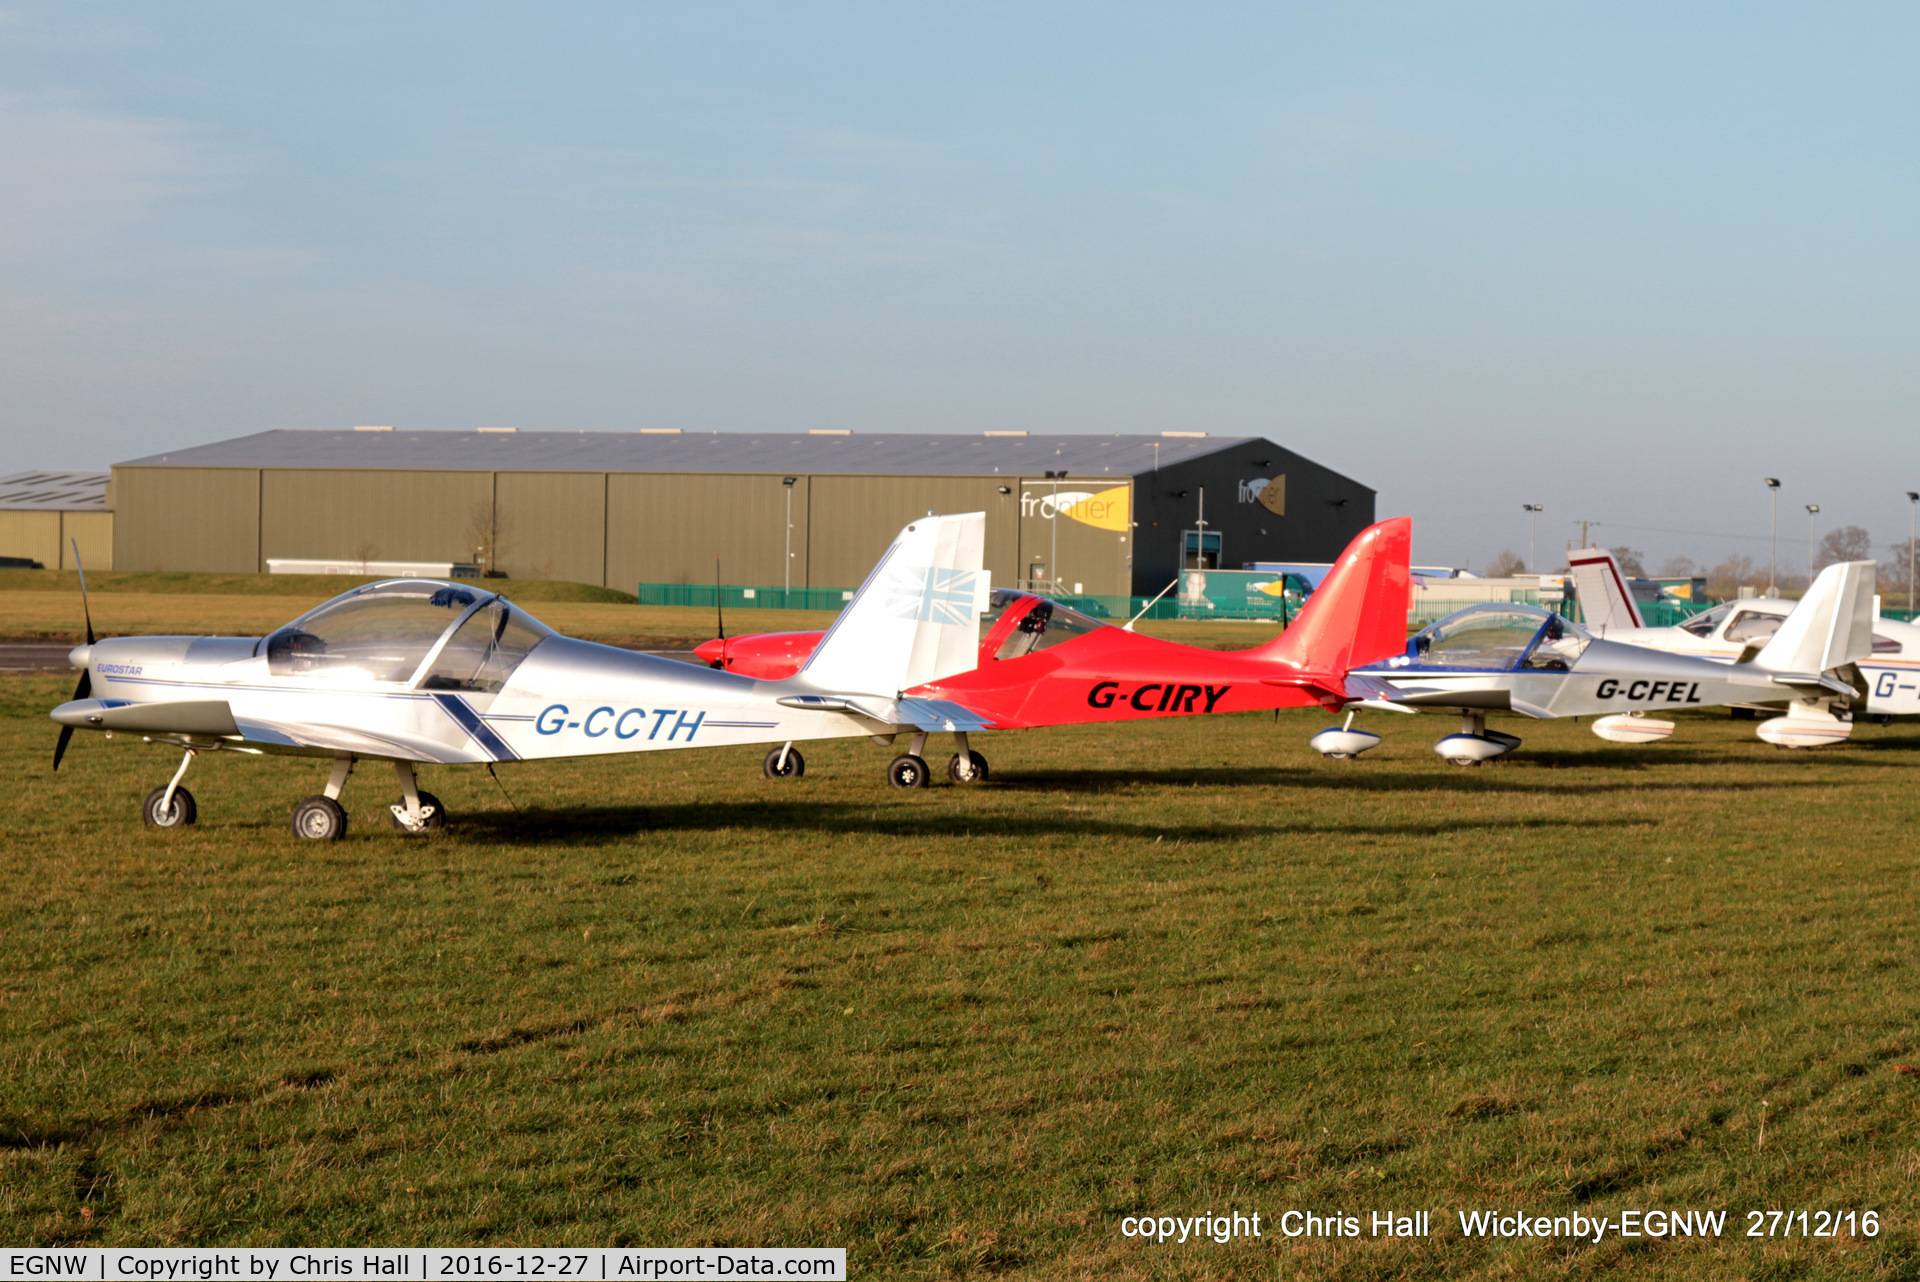 Wickenby Aerodrome Airport, Lincoln, England United Kingdom (EGNW) - EV-97s at the Turkey Curry fly in, Wickenby